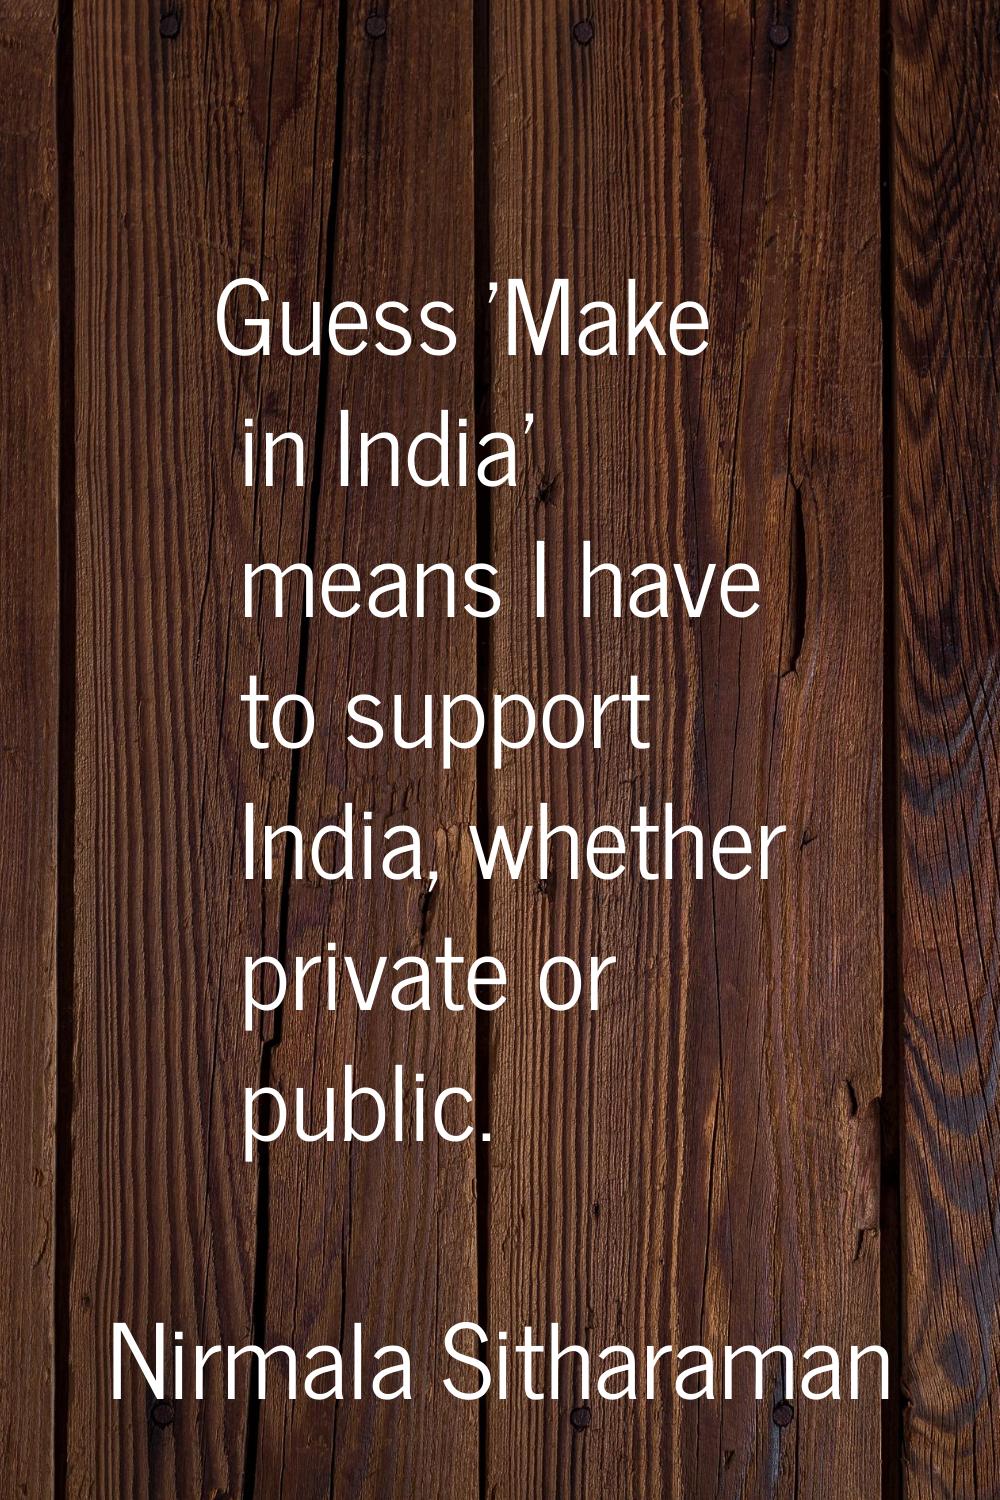 Guess 'Make in India' means I have to support India, whether private or public.